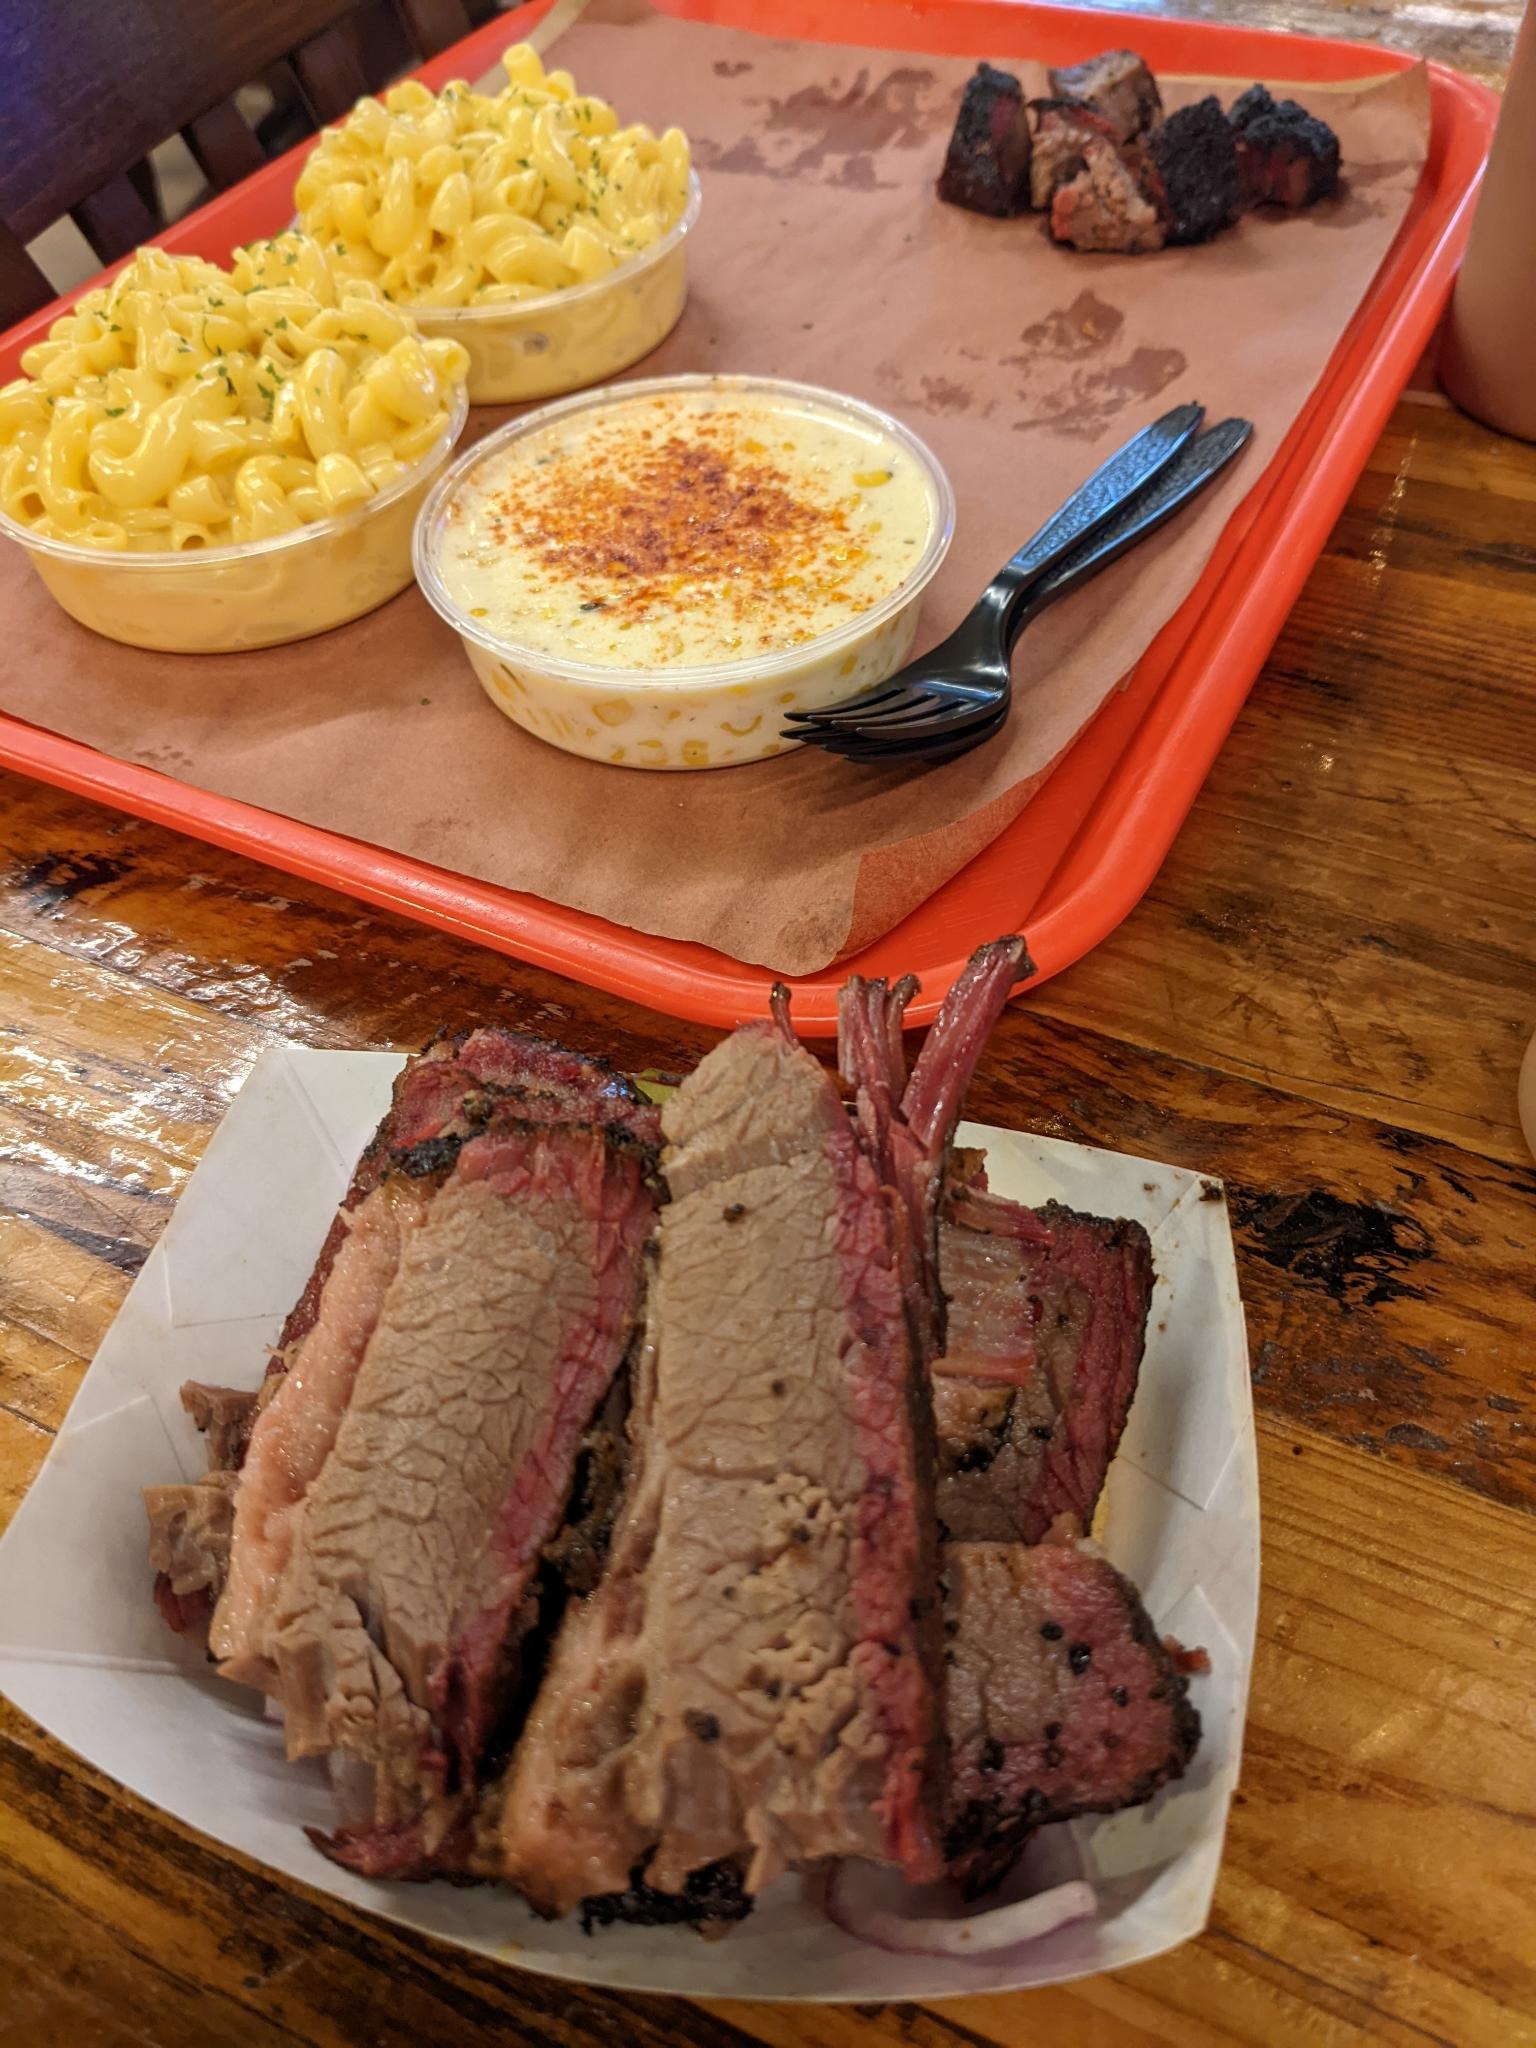 Texas brisket piled onto a sandwich with sides of macaroni and cheese, cream corn, and burnt ends